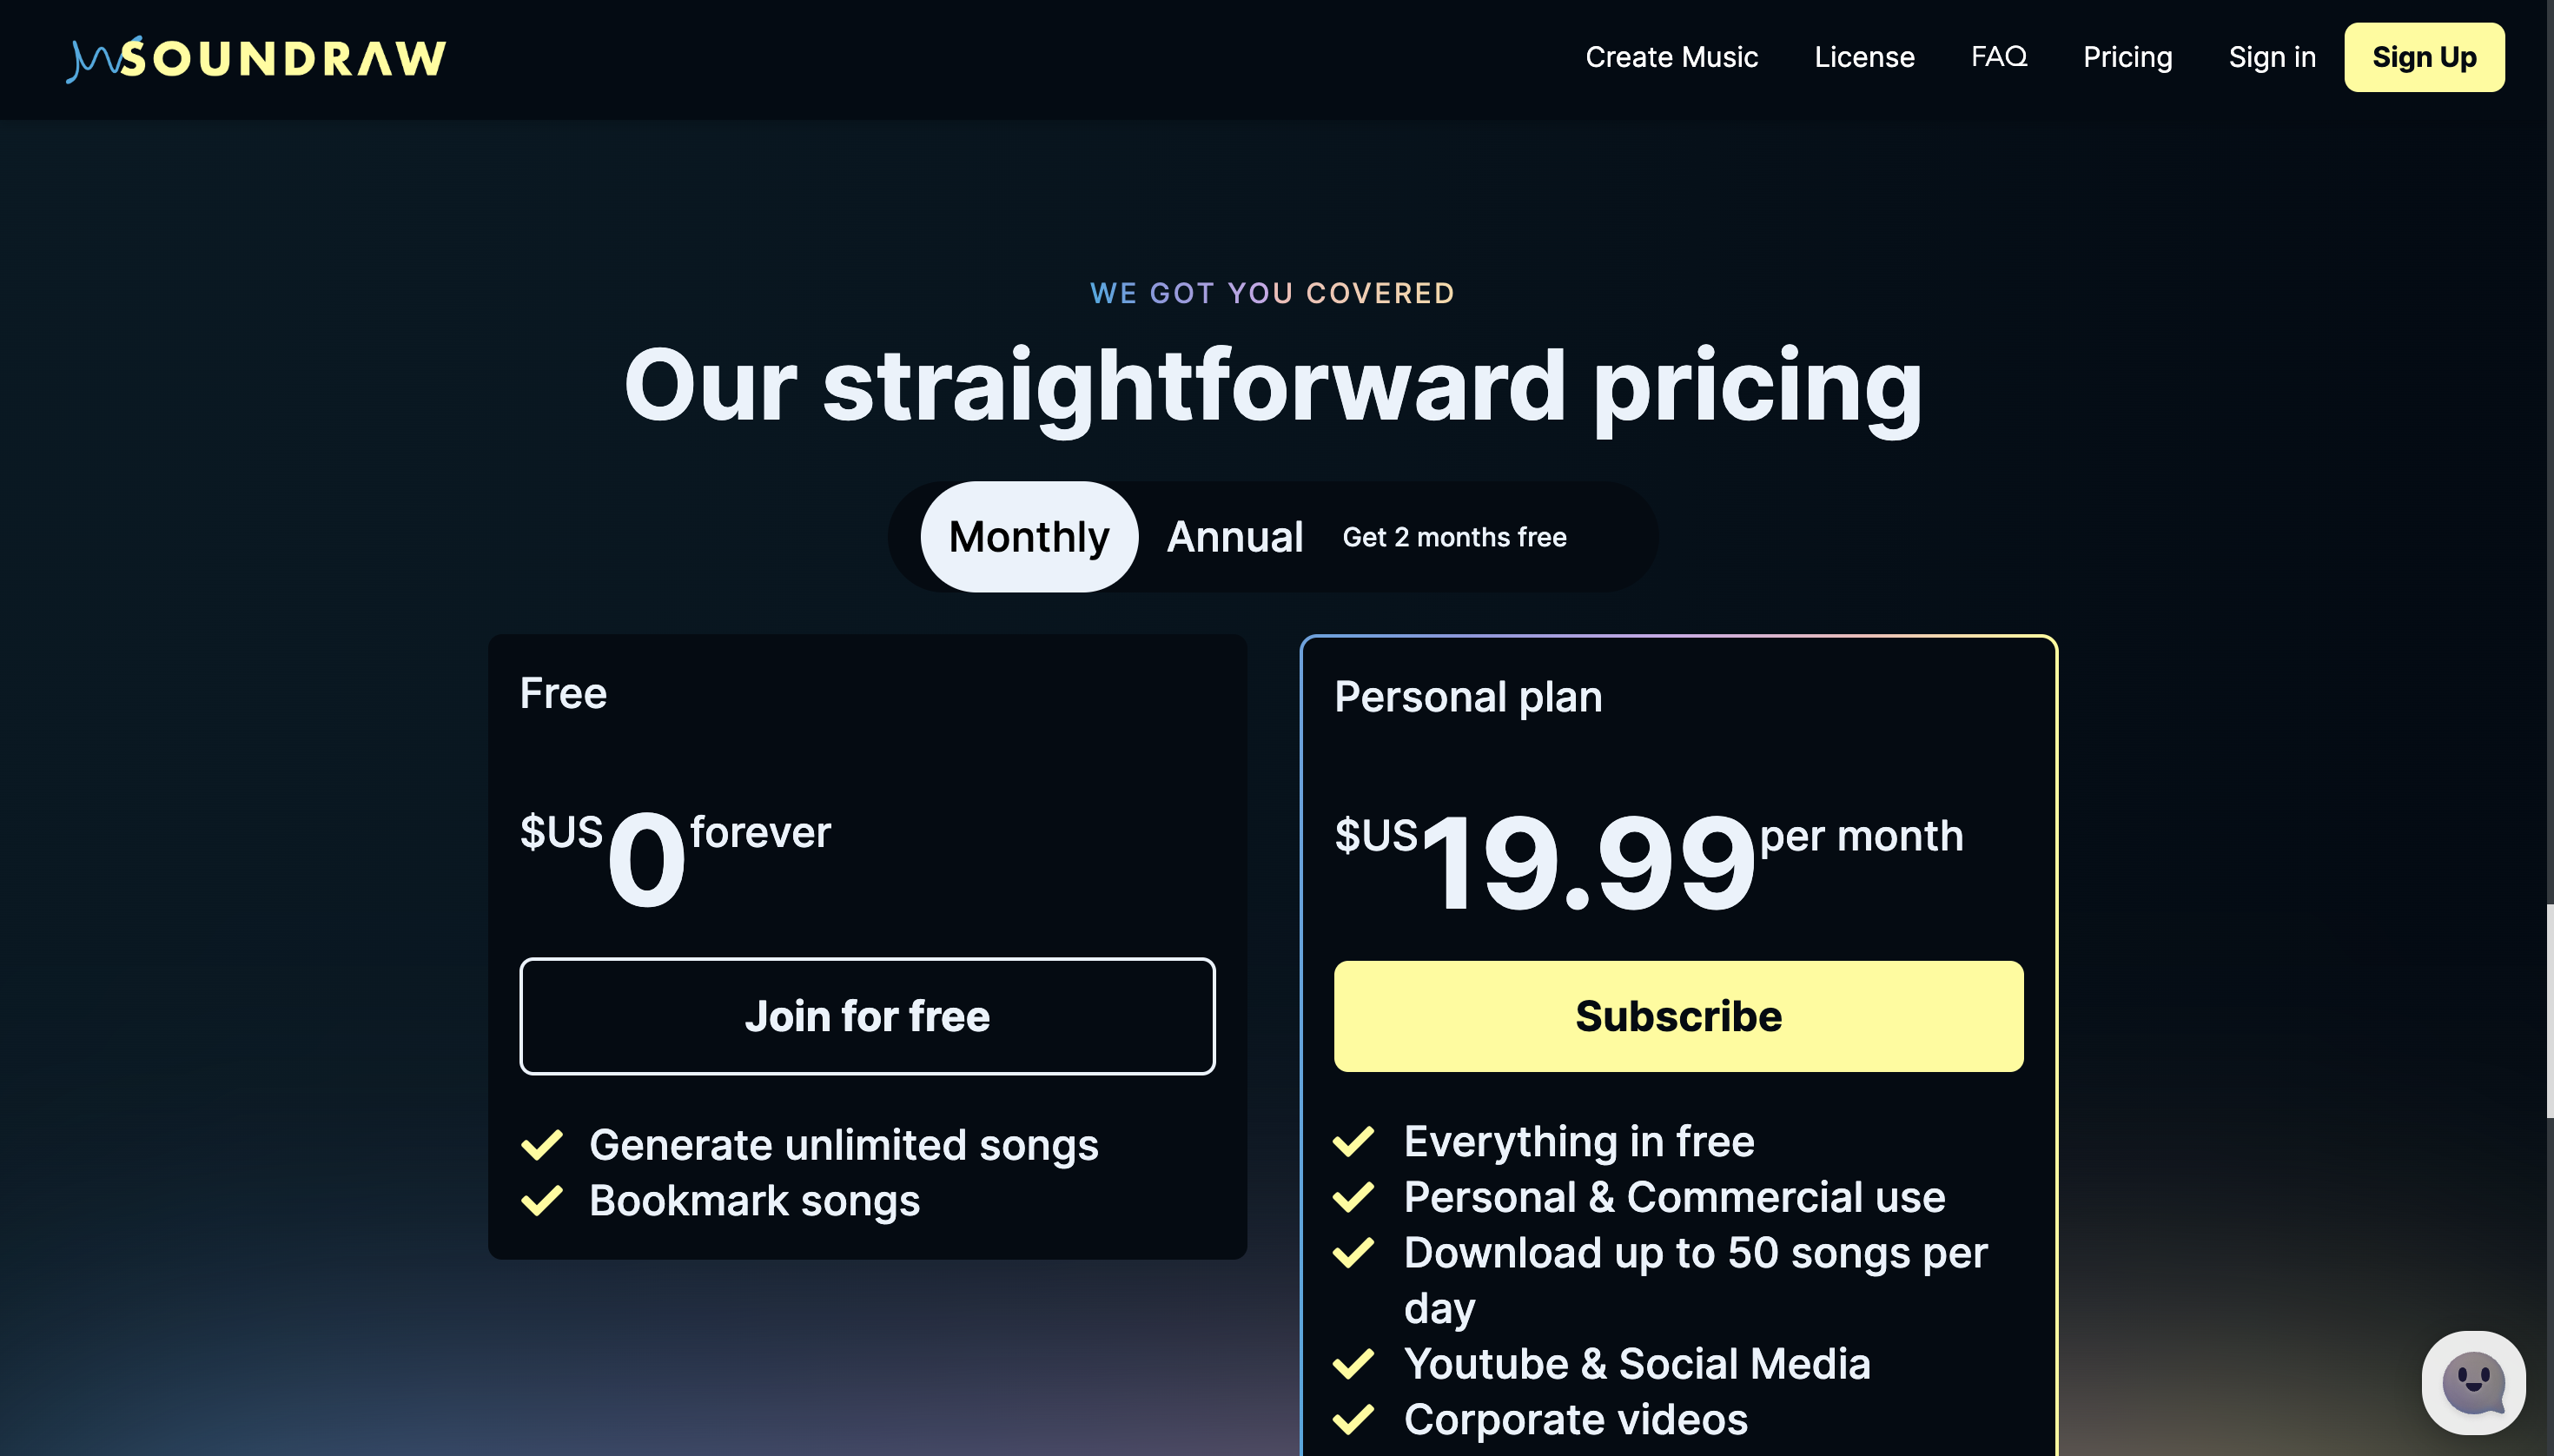 Soundraw Pricing